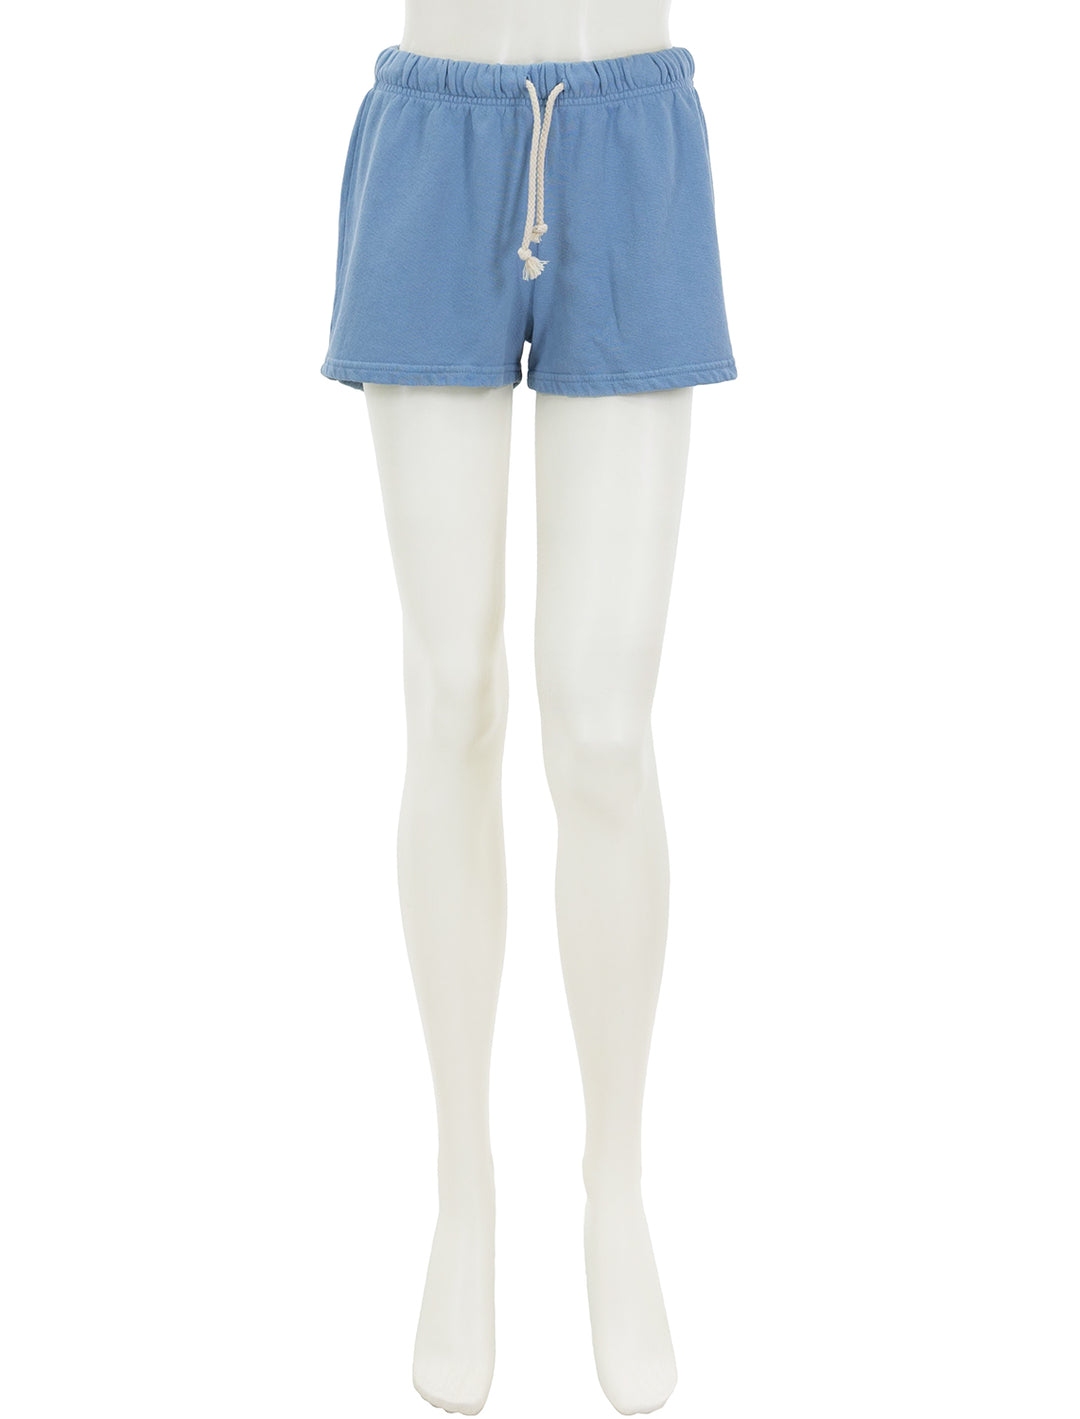 Front view of Perfectwhitetee's layla sweat shorts in carolina blue.